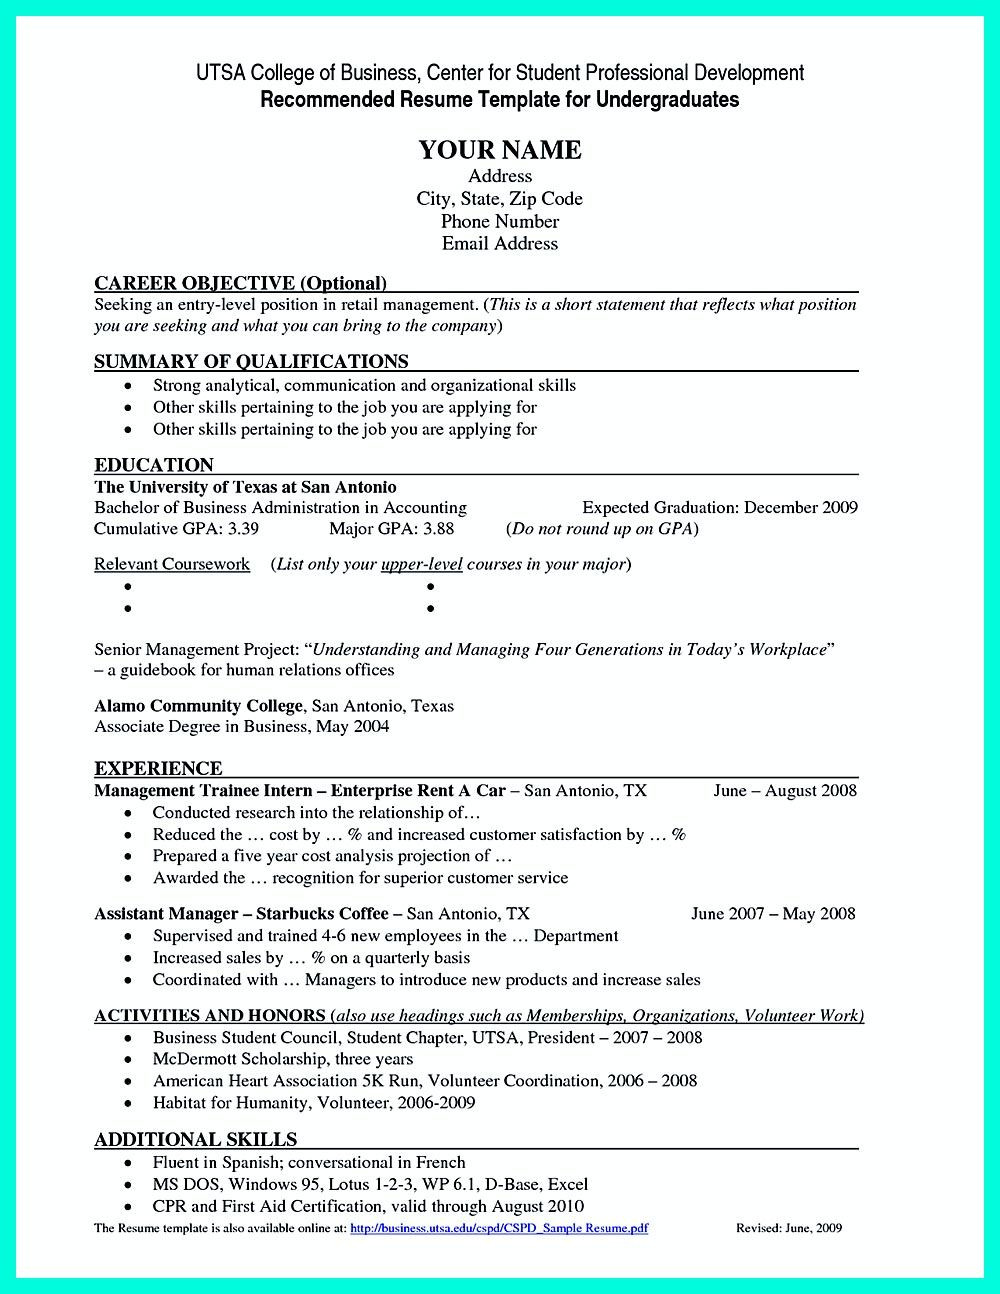 Sample Resume for Hr assistant Fresh Graduate Best Current College Student Resume with No Experience Job …